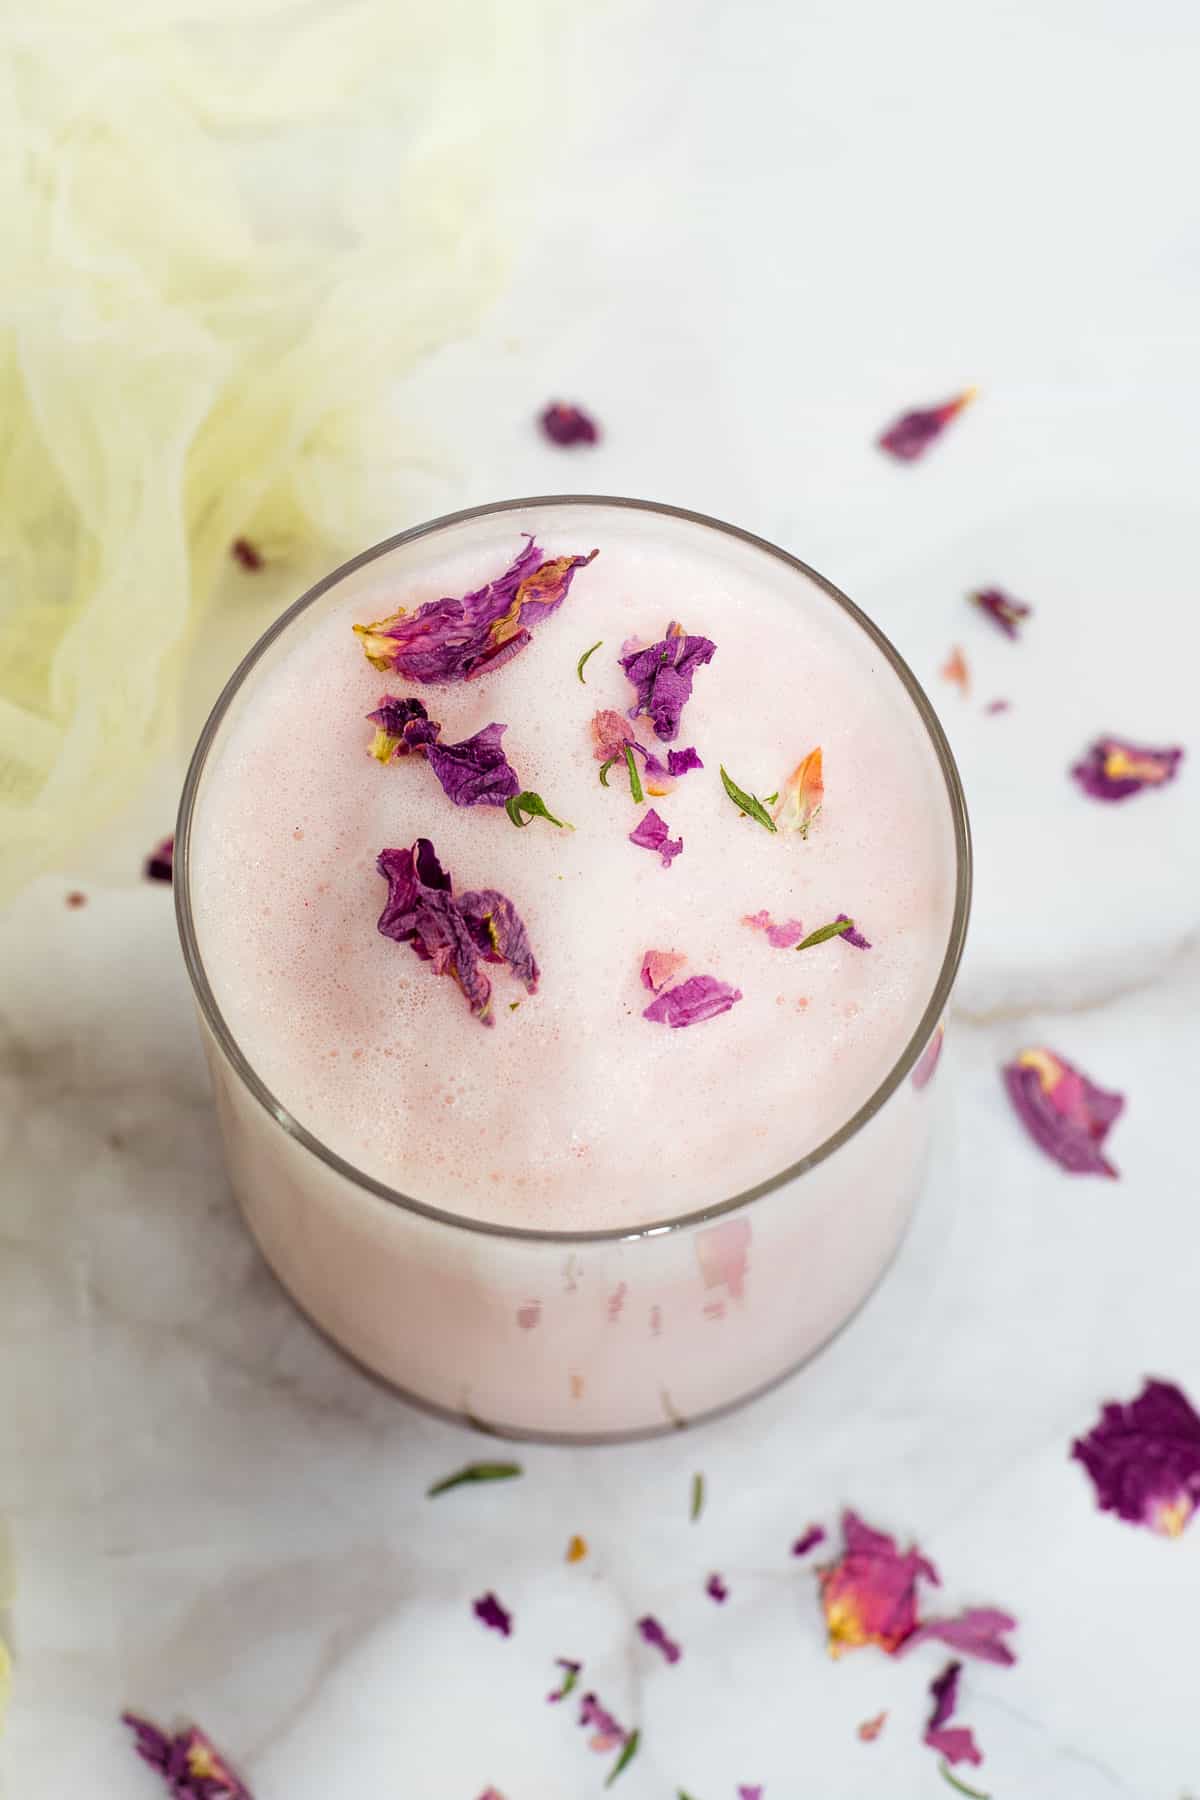 A glass of rose milk with rose petal flakes on top.